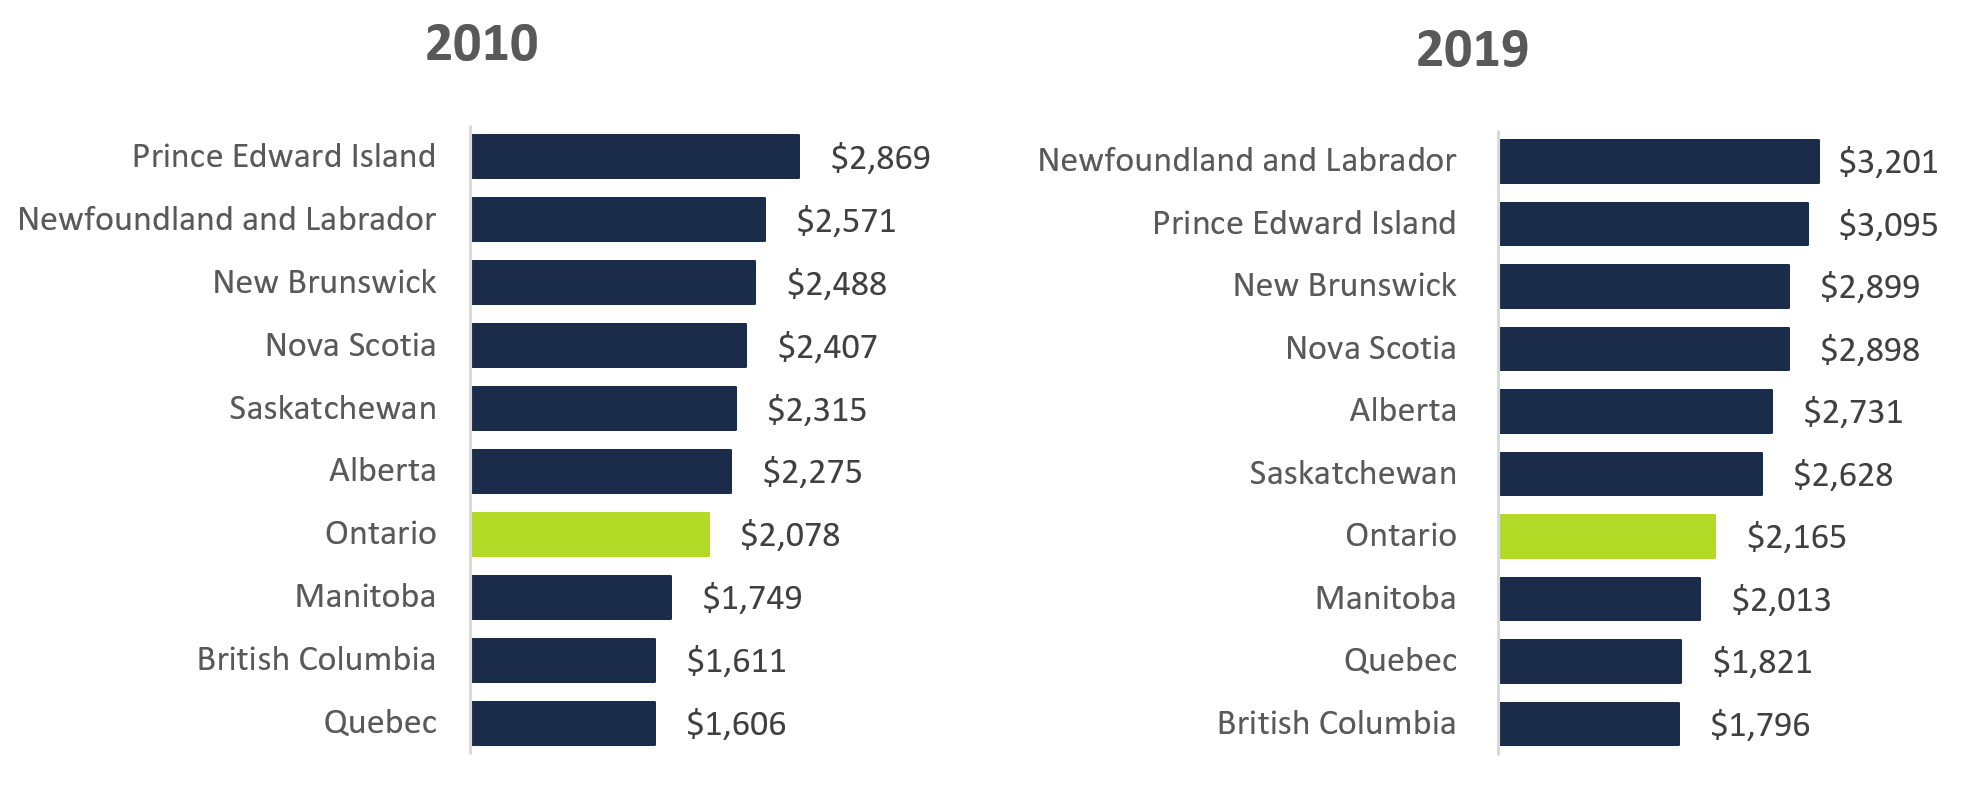 Average household home energy spending by province, 2010 and 2019 